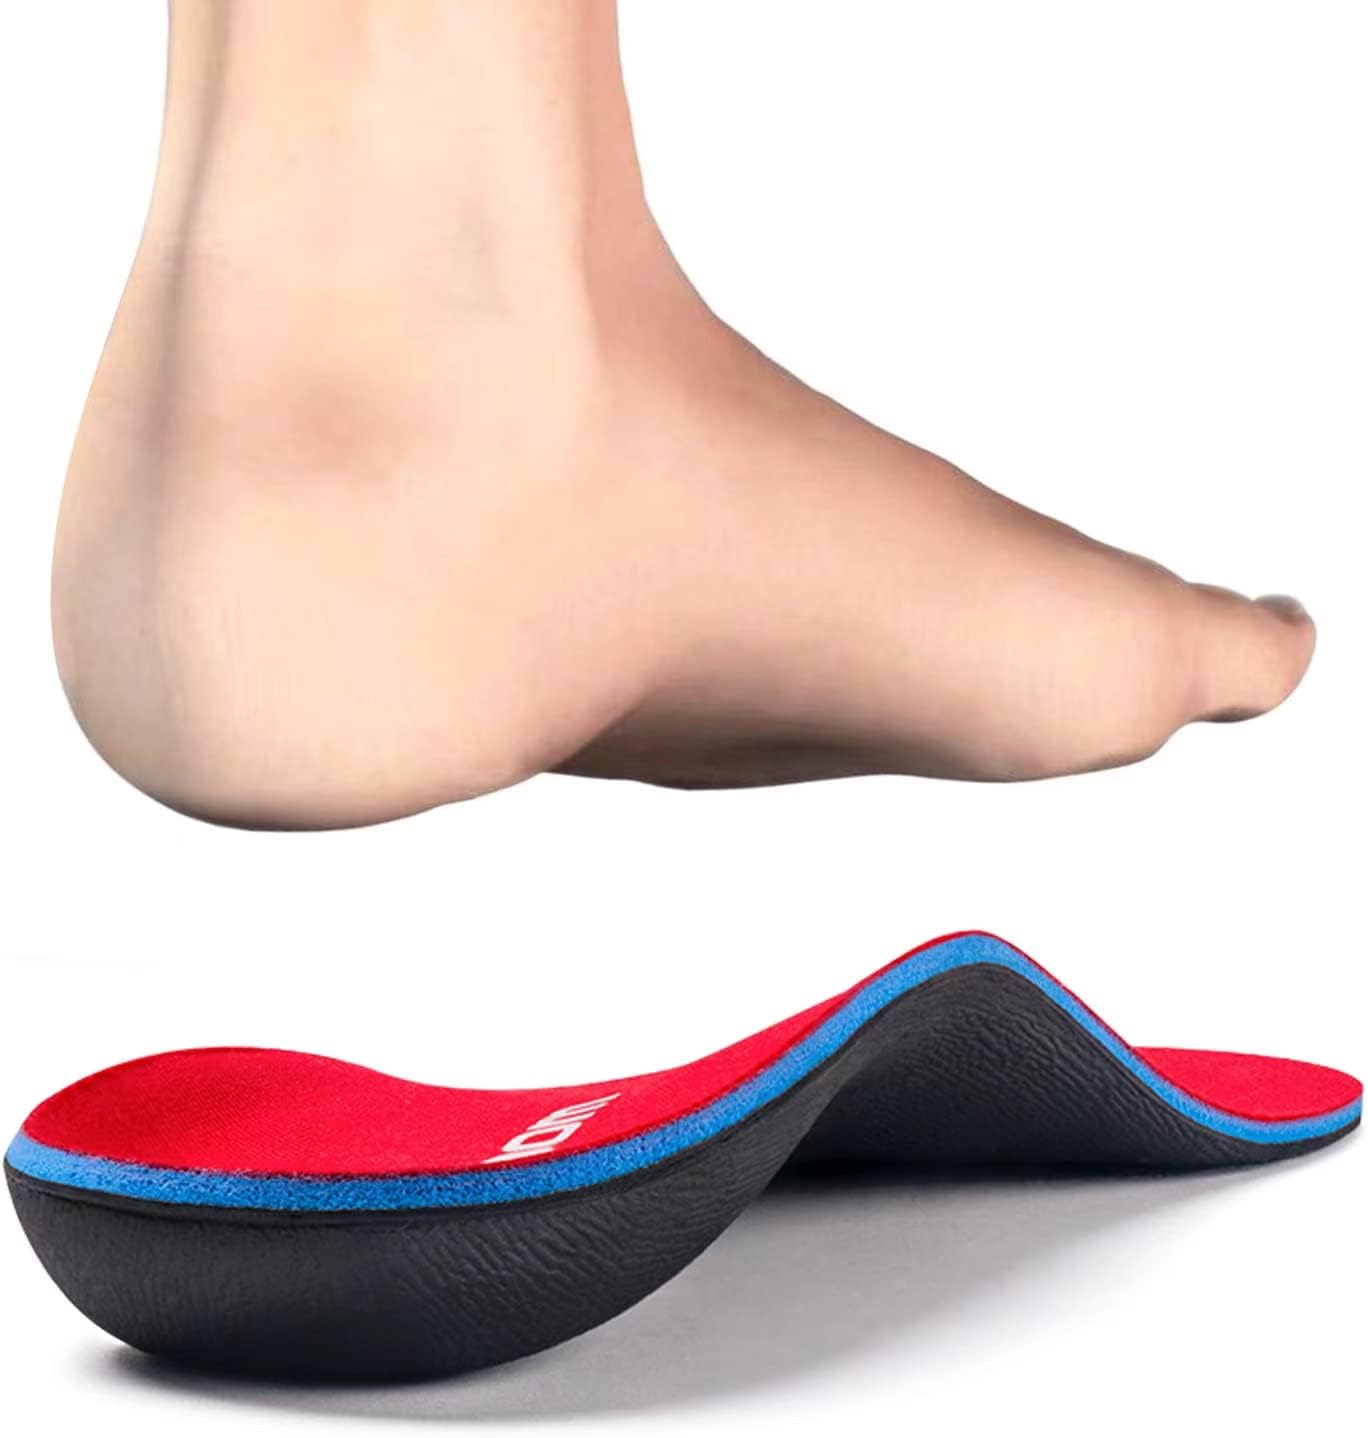 Popzoom Arch Support Flat Feet Insoles - Orthotic Shoe Inserts, 3cm, Red, Unisex